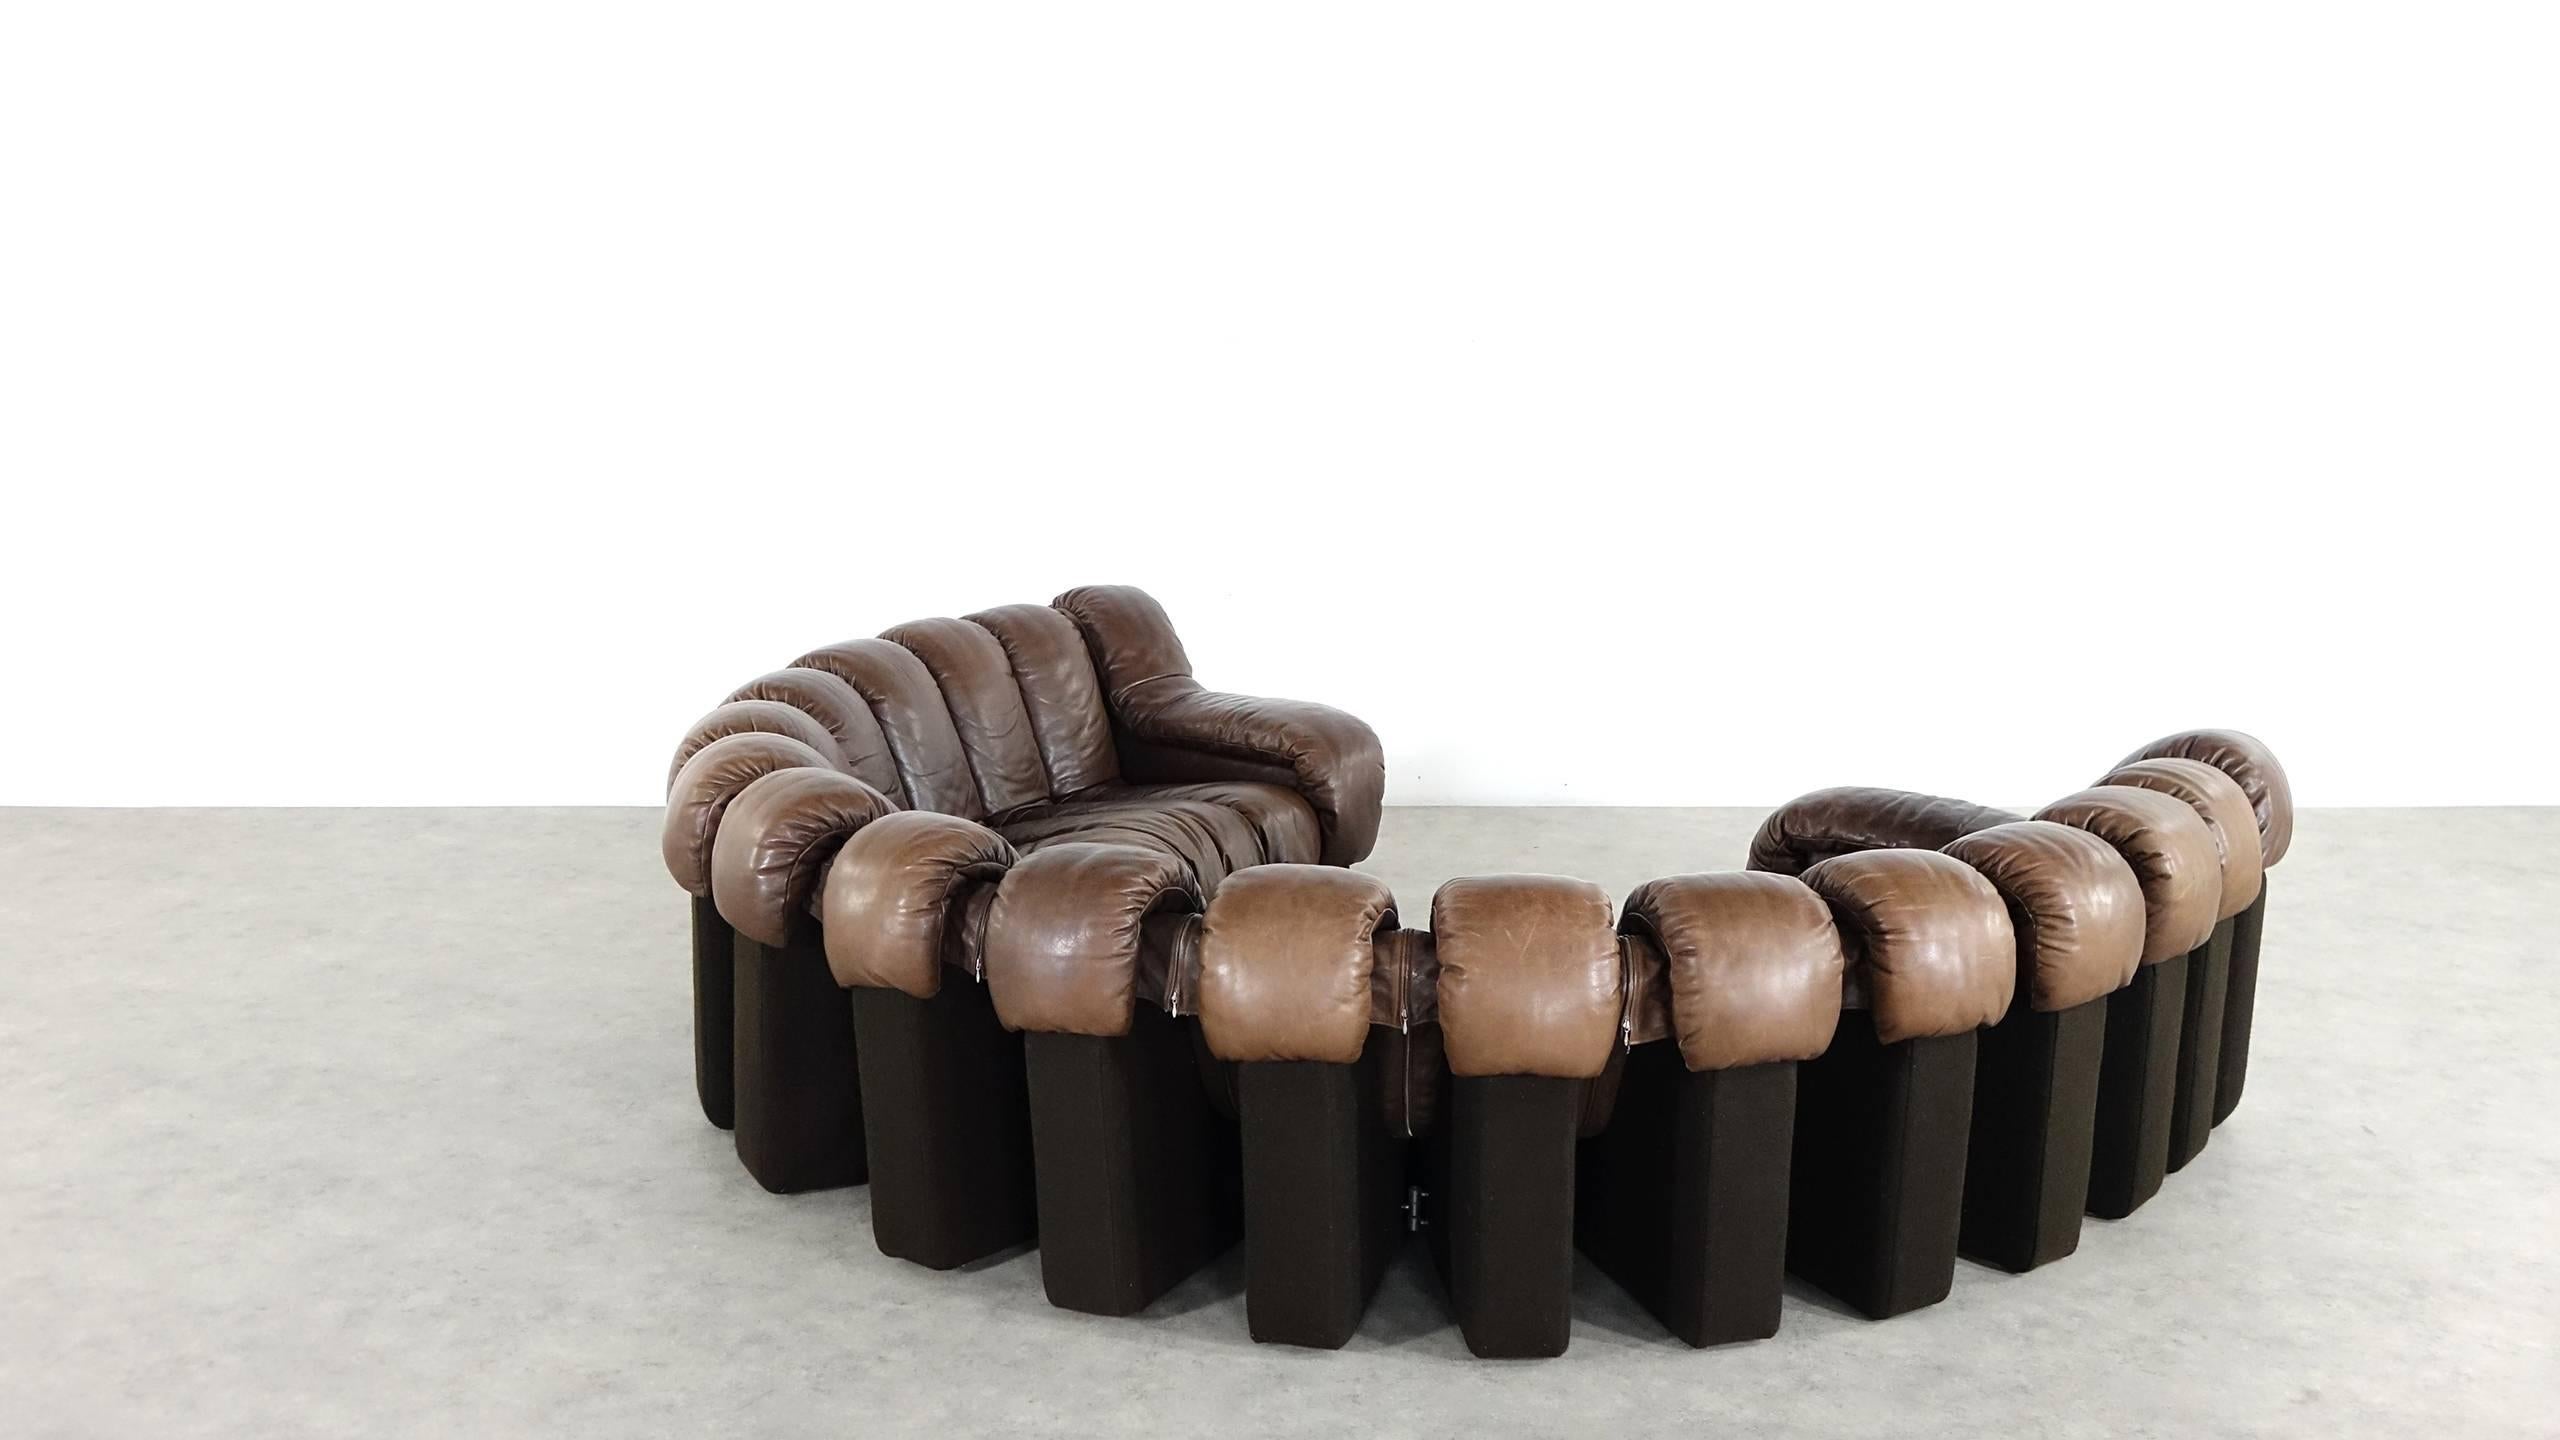 Late 20th Century De Sede Ds 600 Sofa by Ueli Berger and Riva 1972, Chocolate Leather 18 Elements